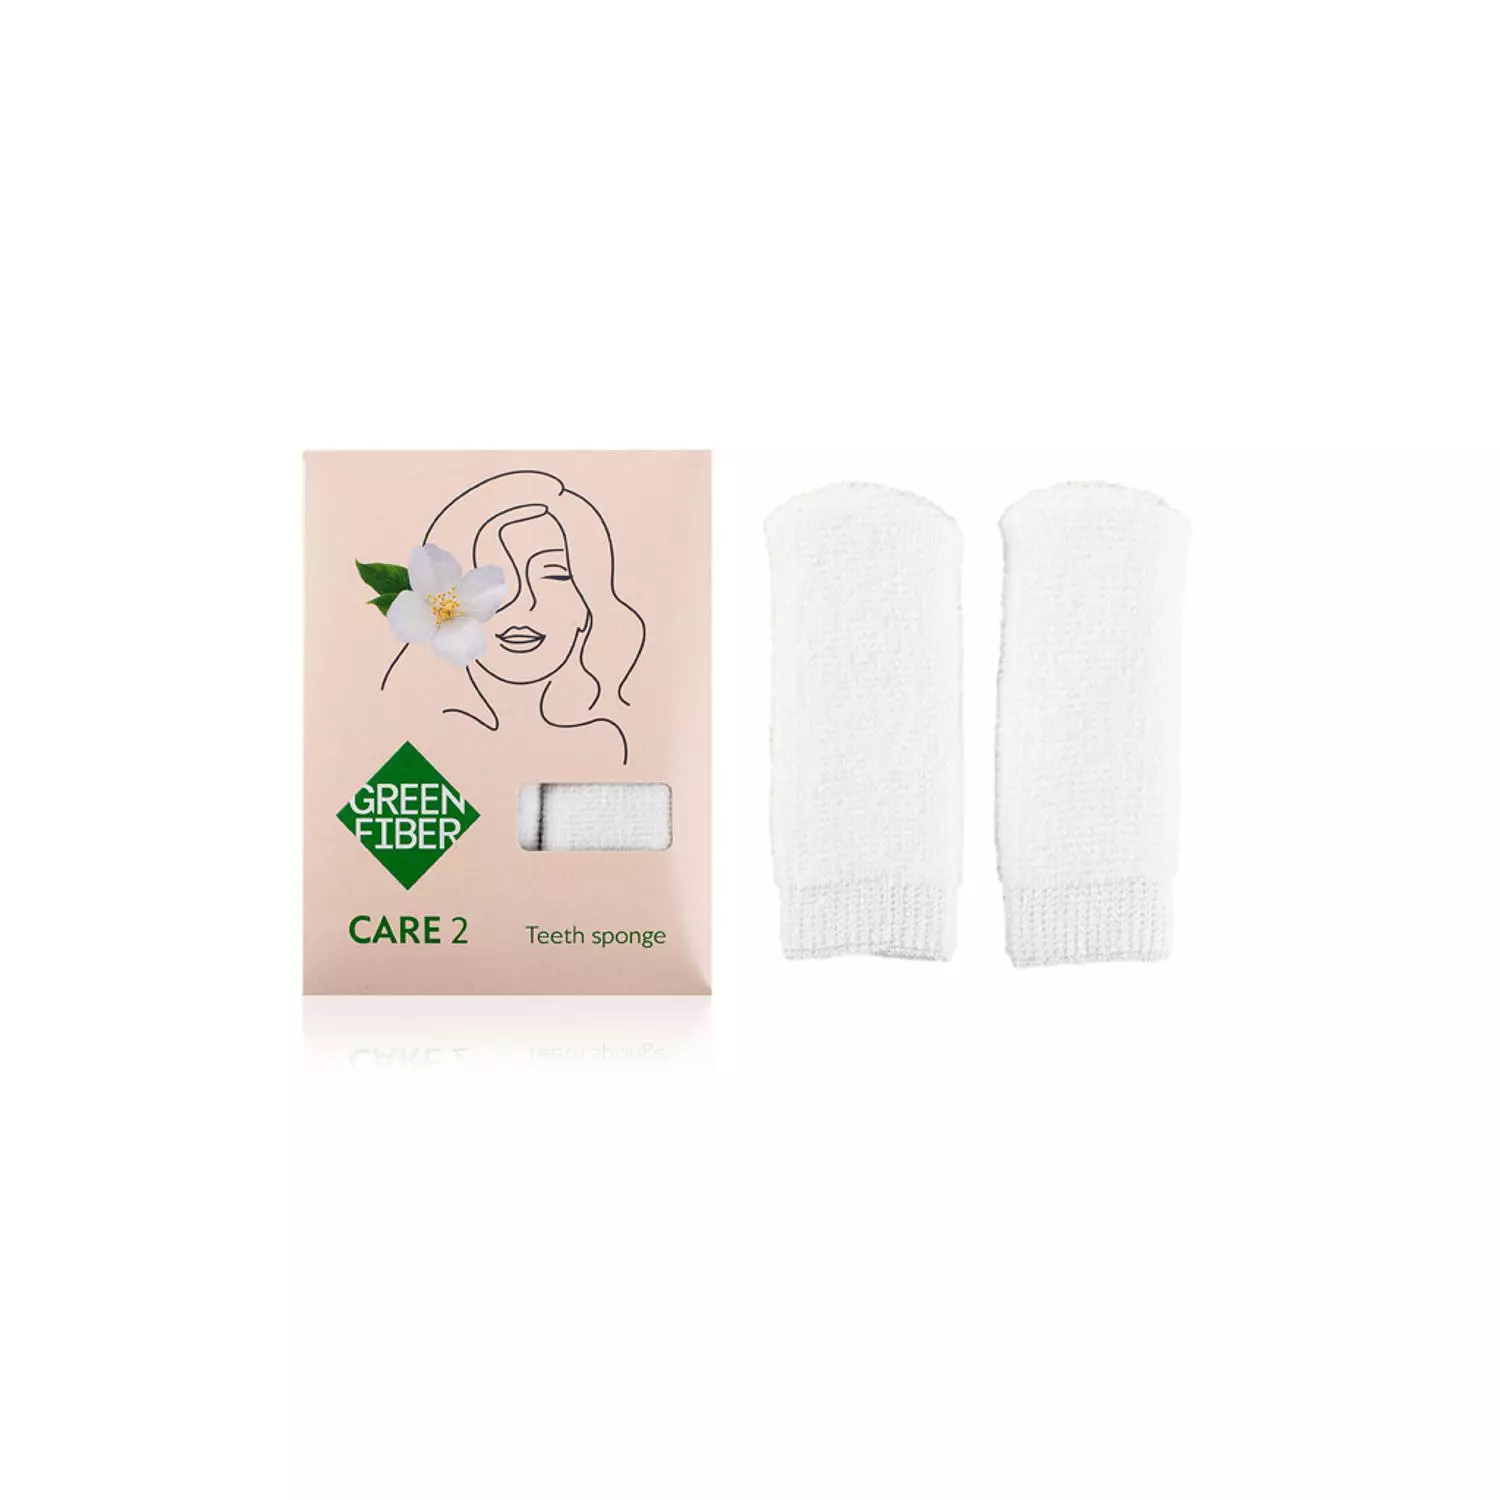 <p><strong><span style="color: rgb(0, 0, 0)">CARE 2 Tooth Brushing Sponge | سبونج تنظيف الاسنان</span></strong></p>